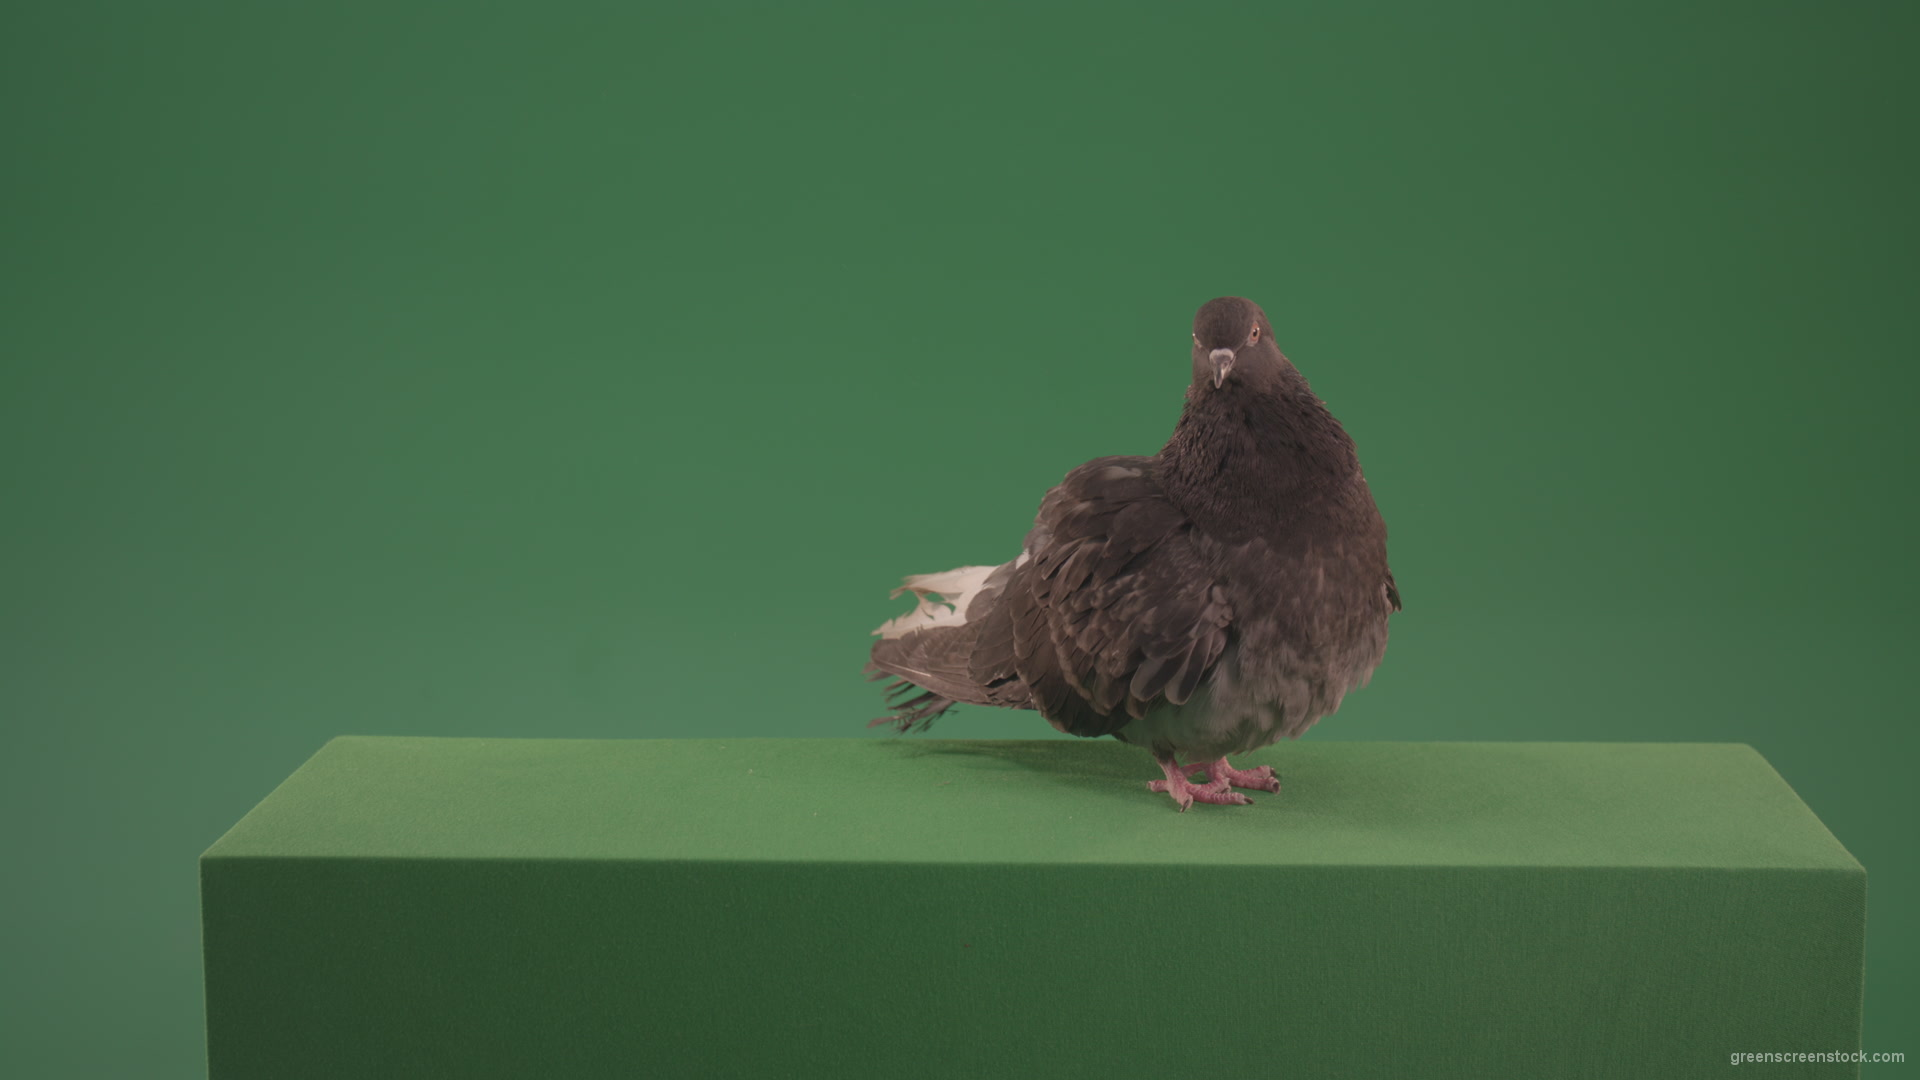 Bird-landed-and-inspected-the-territory-isolated-on-chromakey-background_007 Green Screen Stock